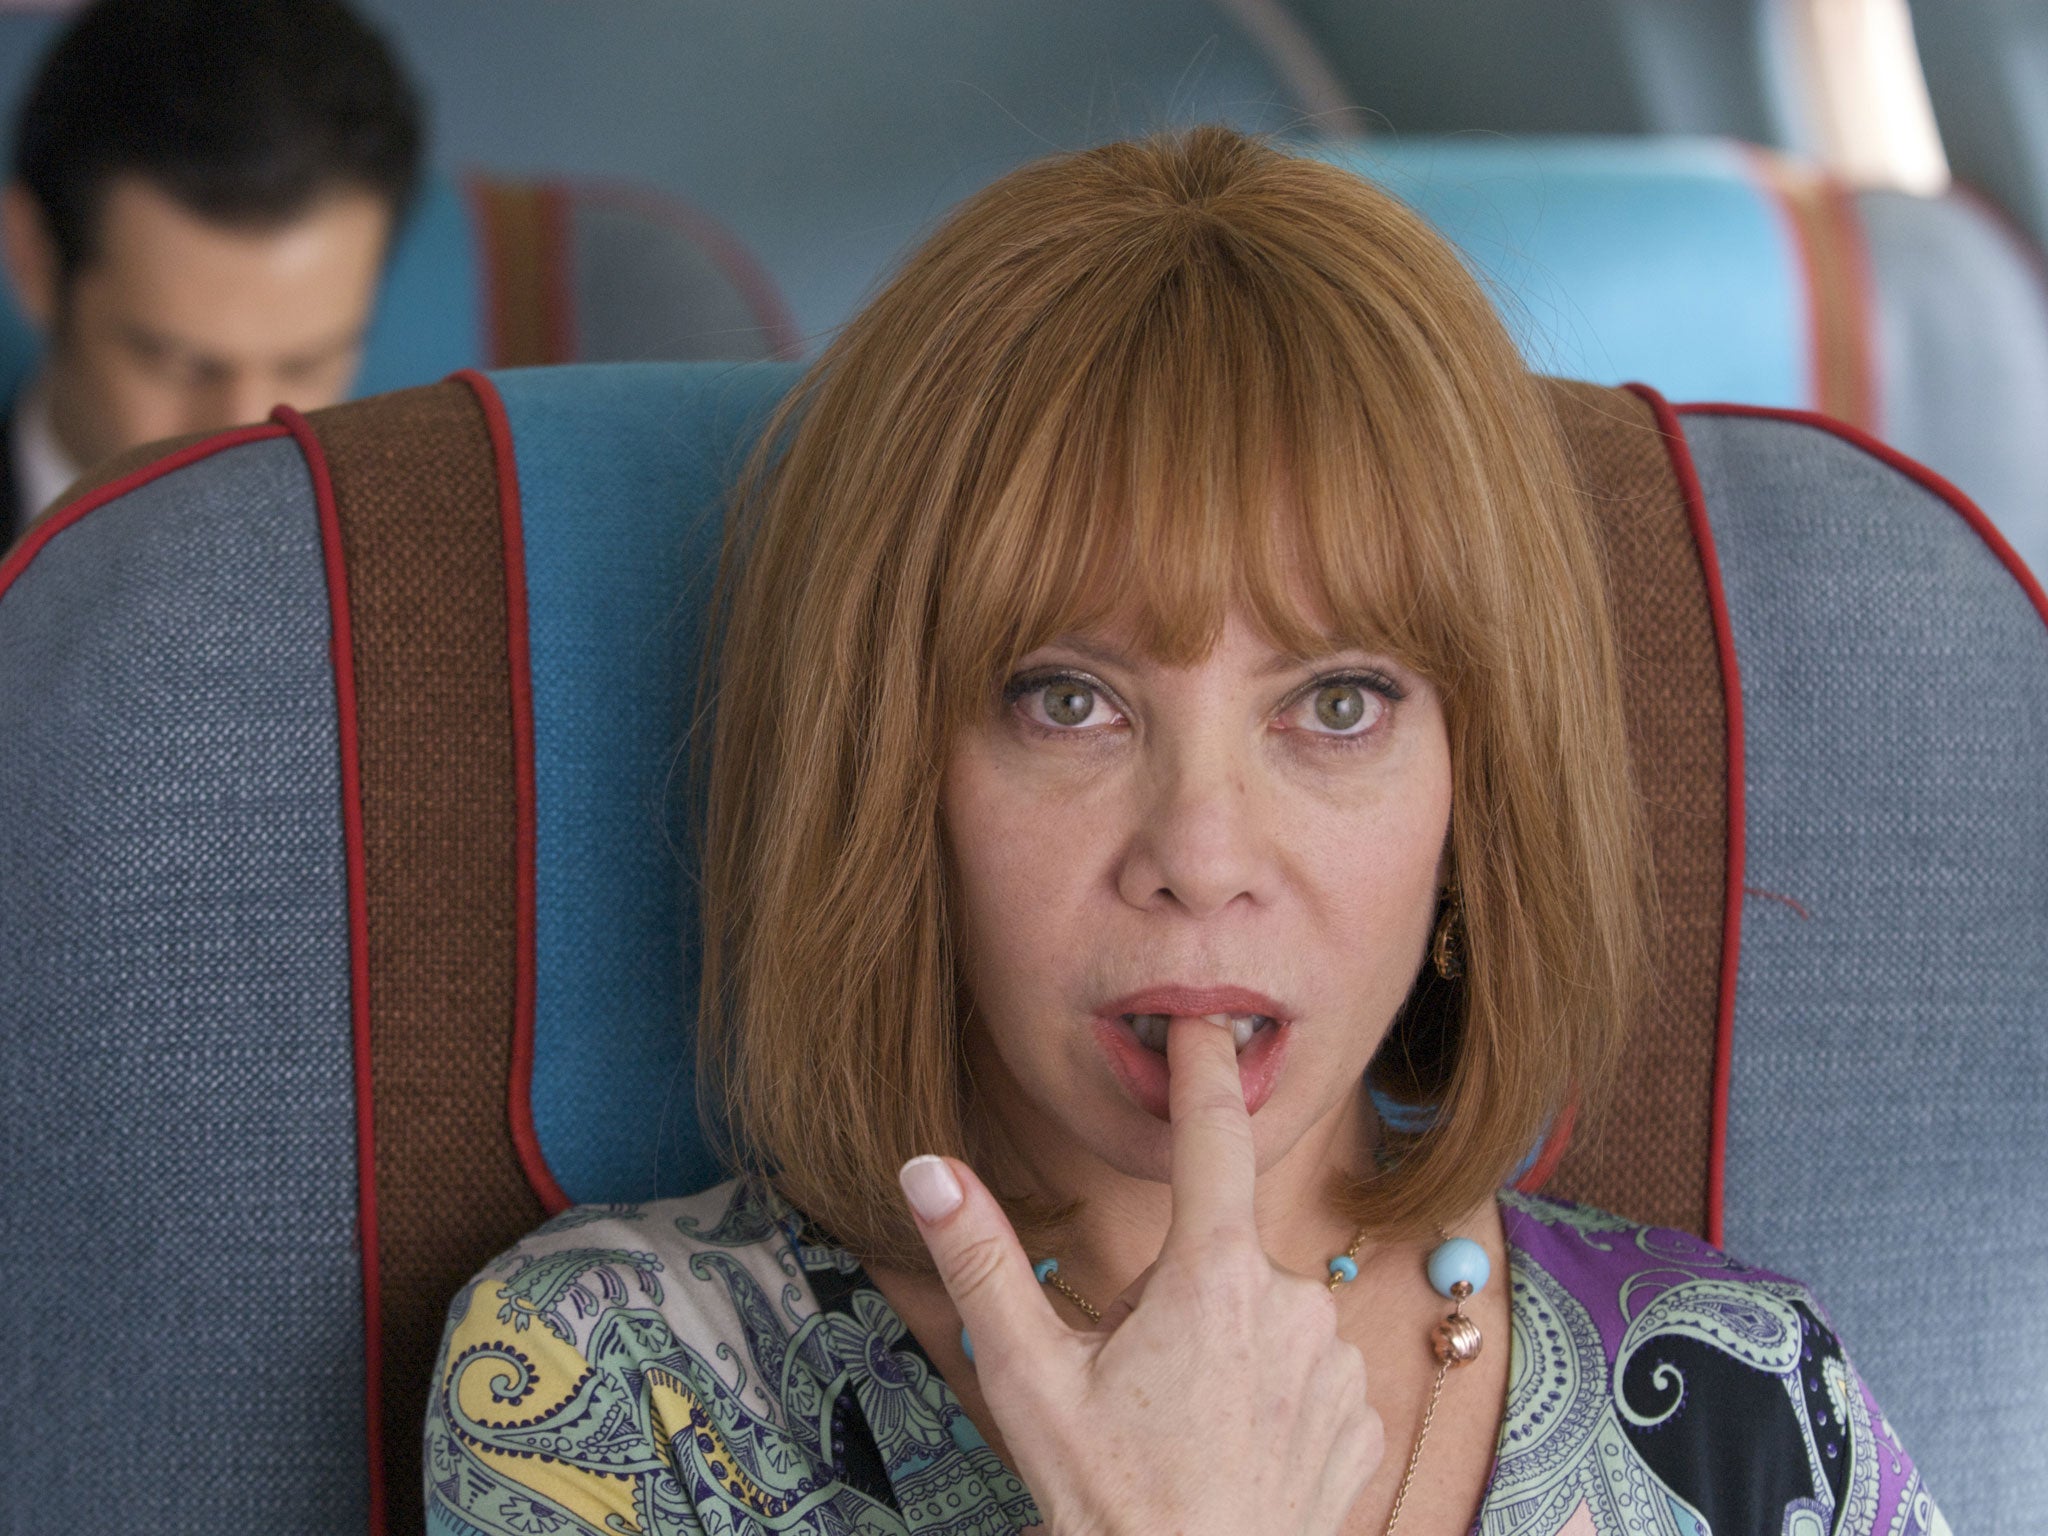 Finger-licking dud: Cecilia Roth in the disappointing ‘I’m So Excited!’